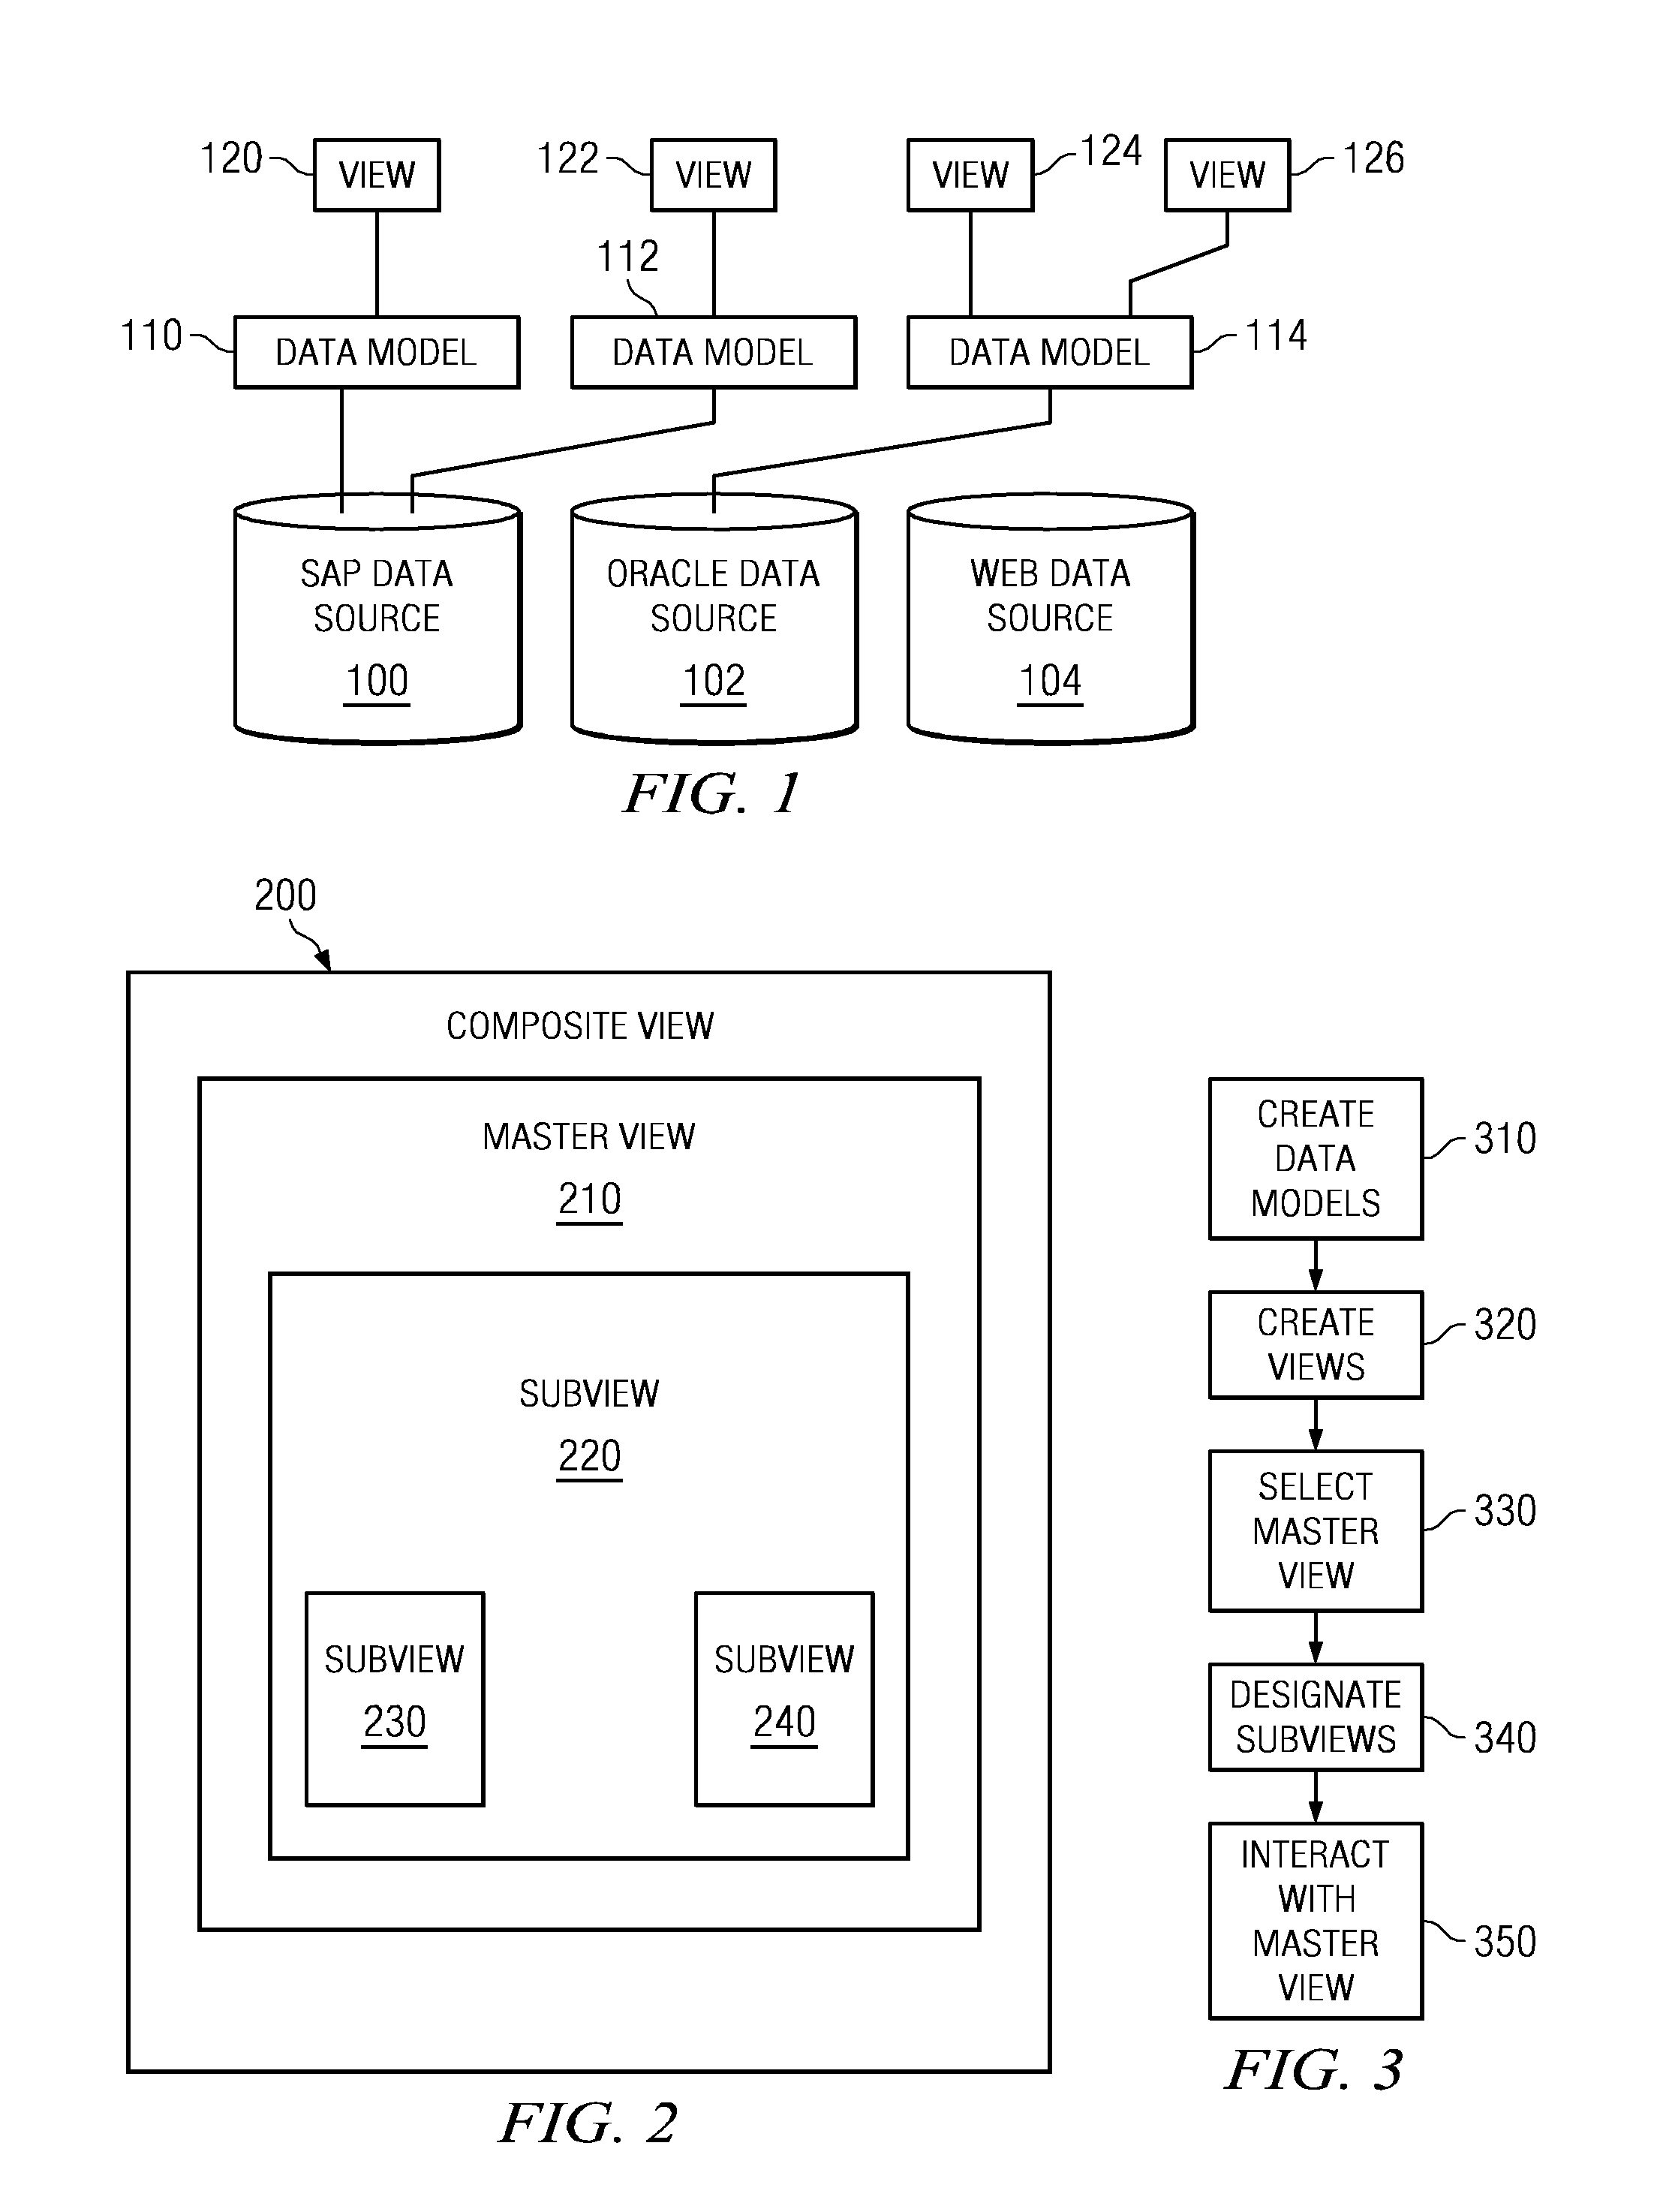 Method and system to provide composite view of components